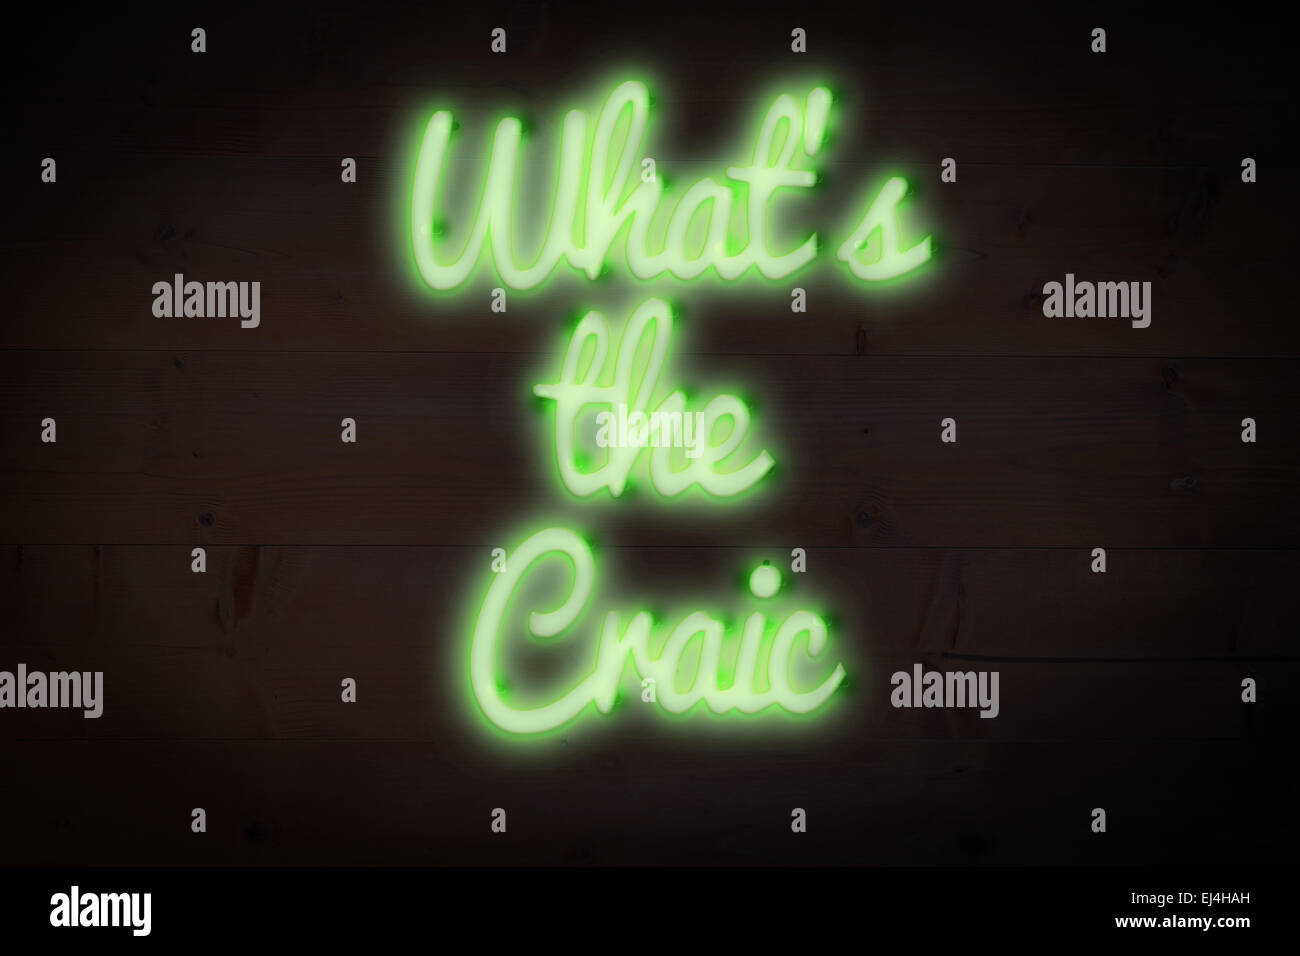 Composite image of whats the craic sign Stock Photo